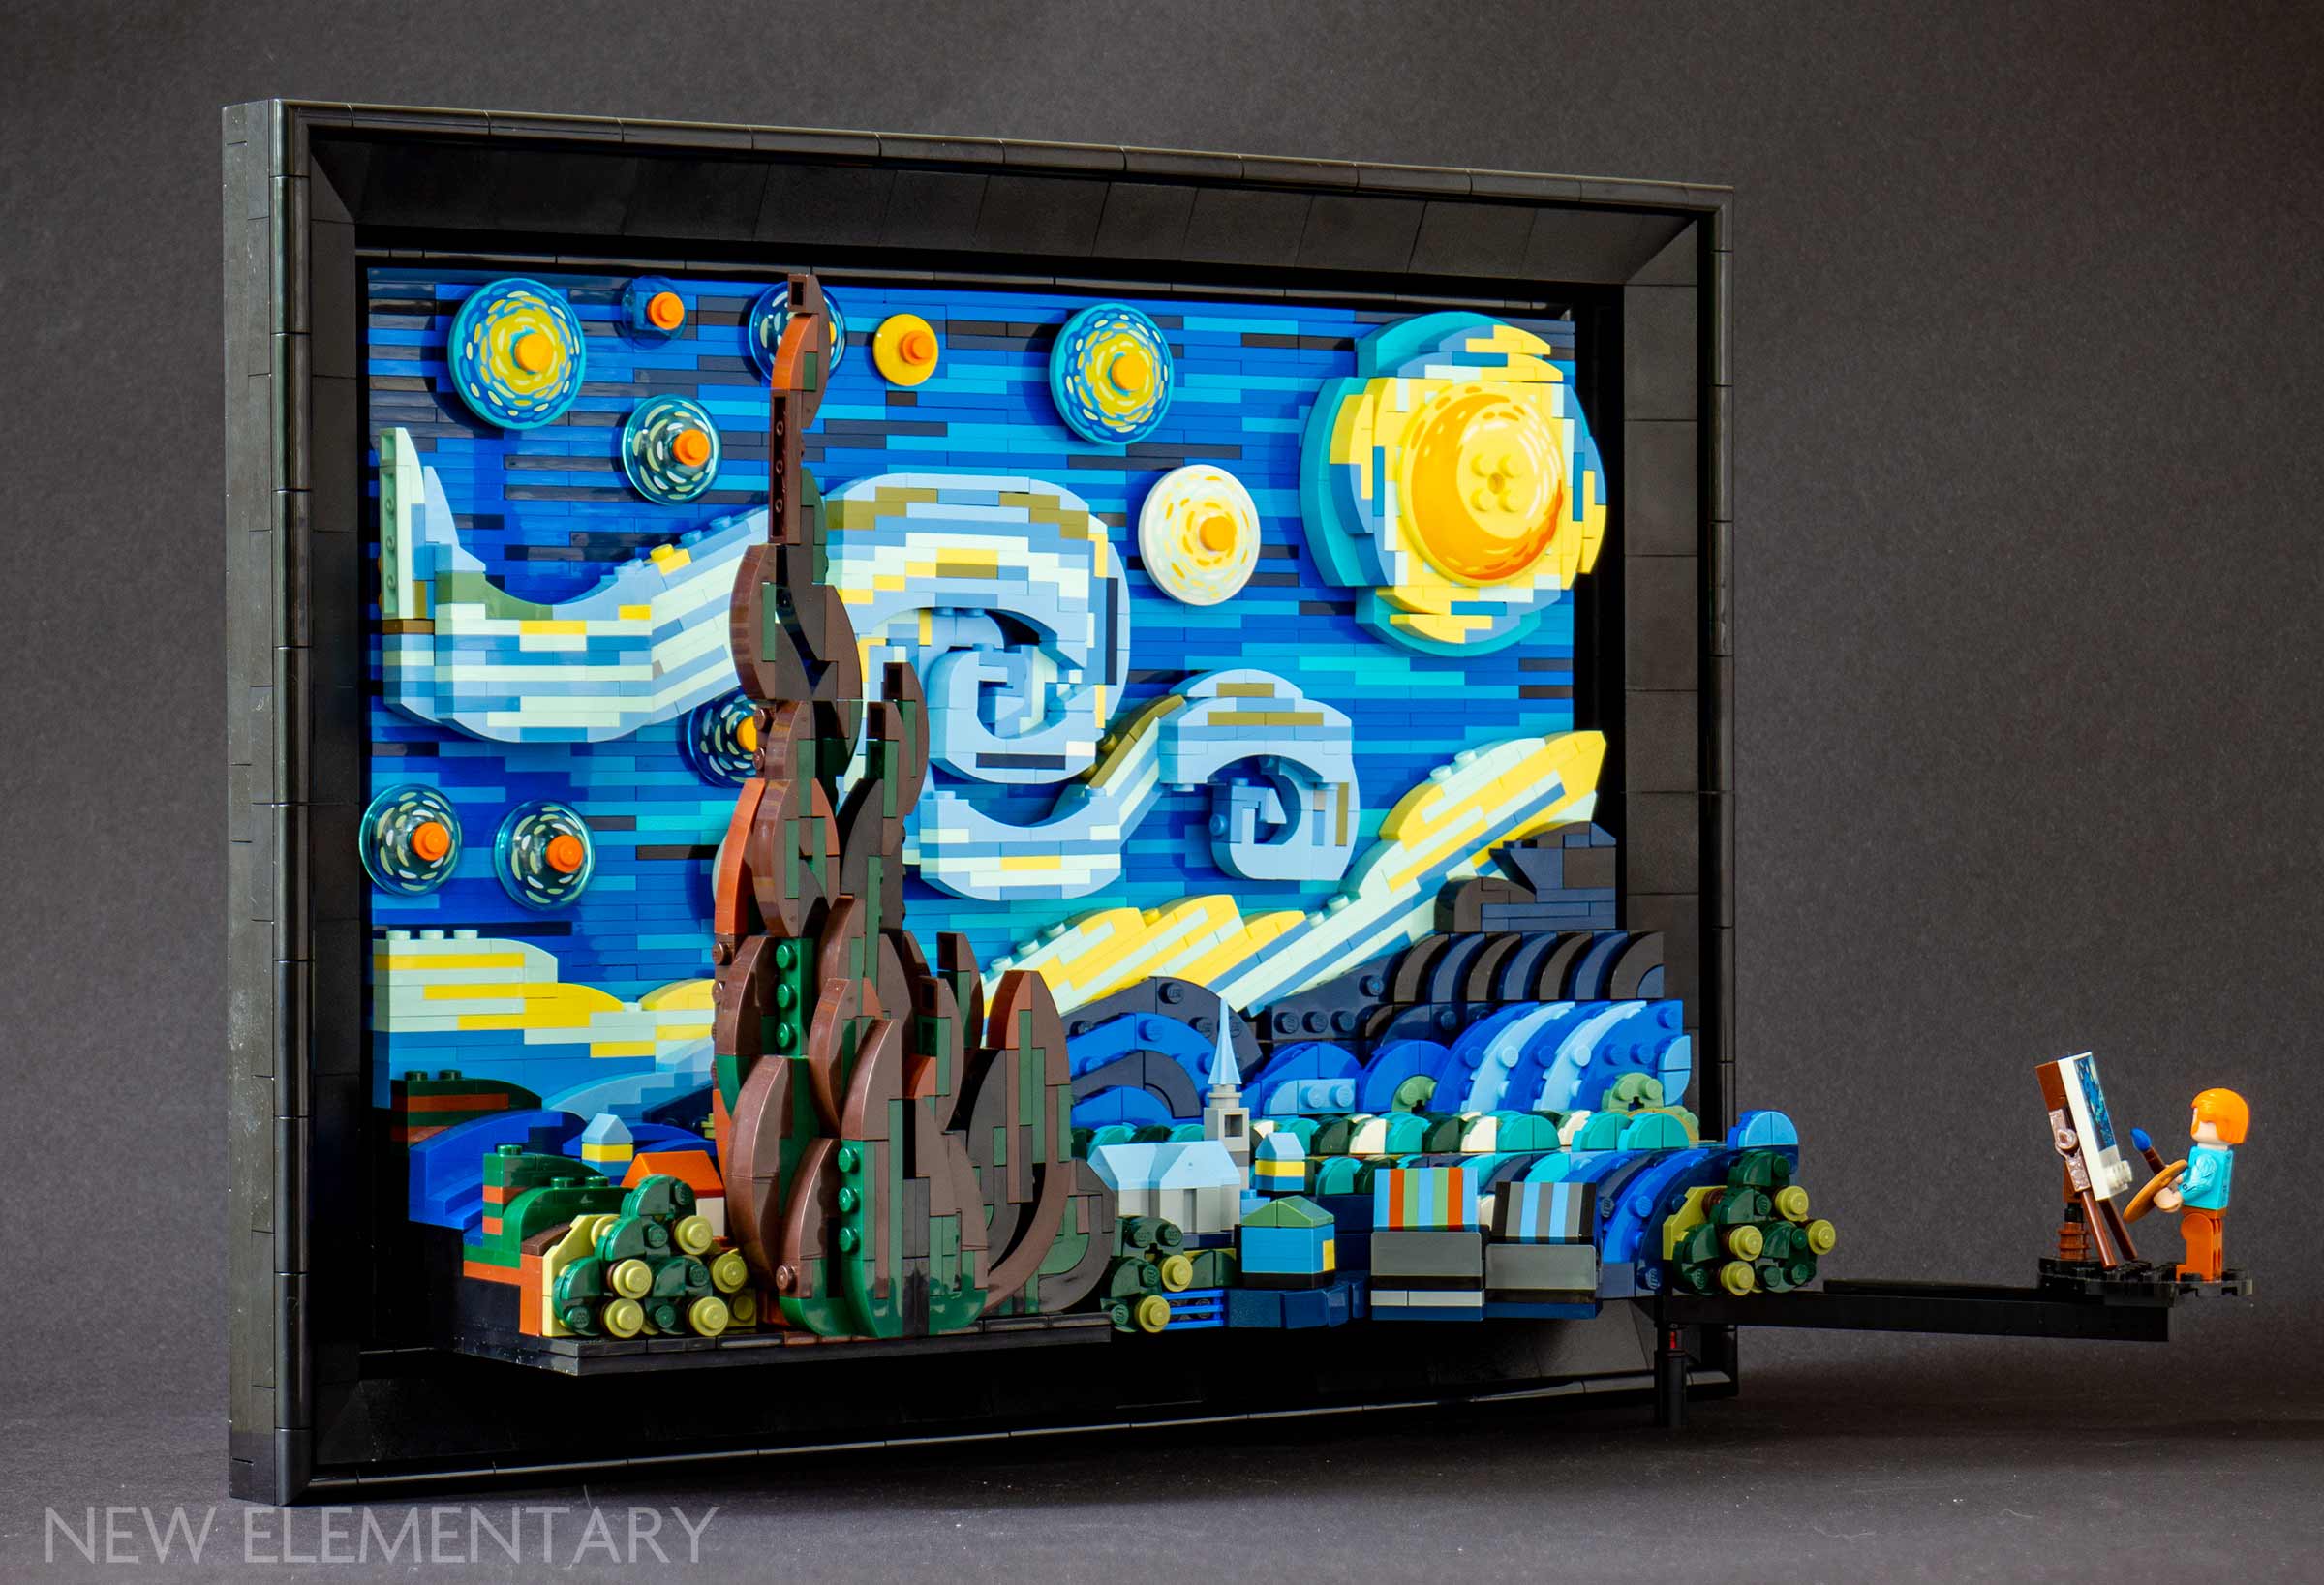 LEGO 21333 Vincent van Gogh - The Starry Night - LEGO Ideas (CUUSOO) -  Condition New.